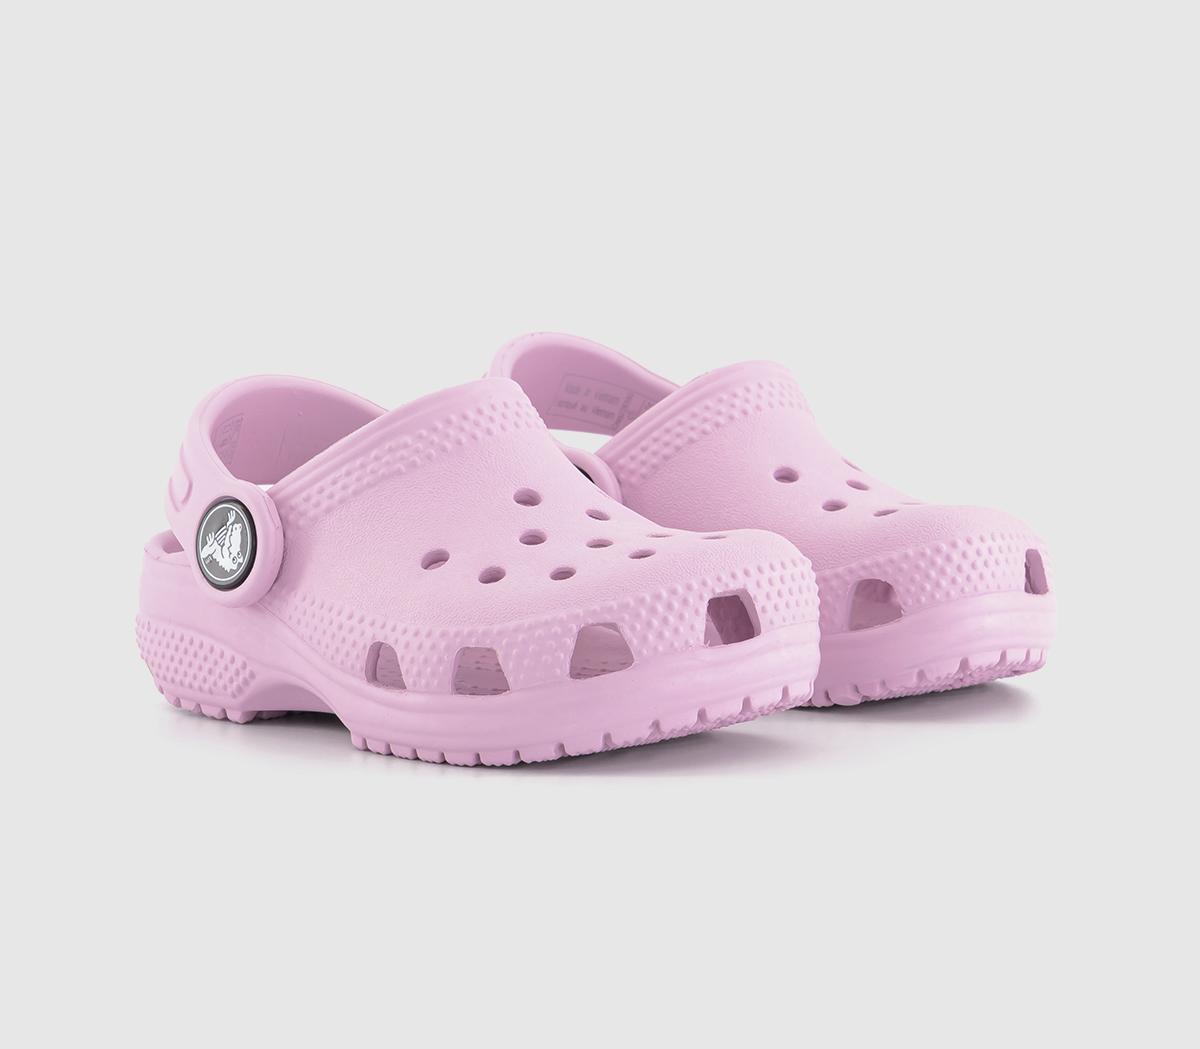 Crocs Classic Kids Clogs Ballerina Pink Synthetic, 4 Infant